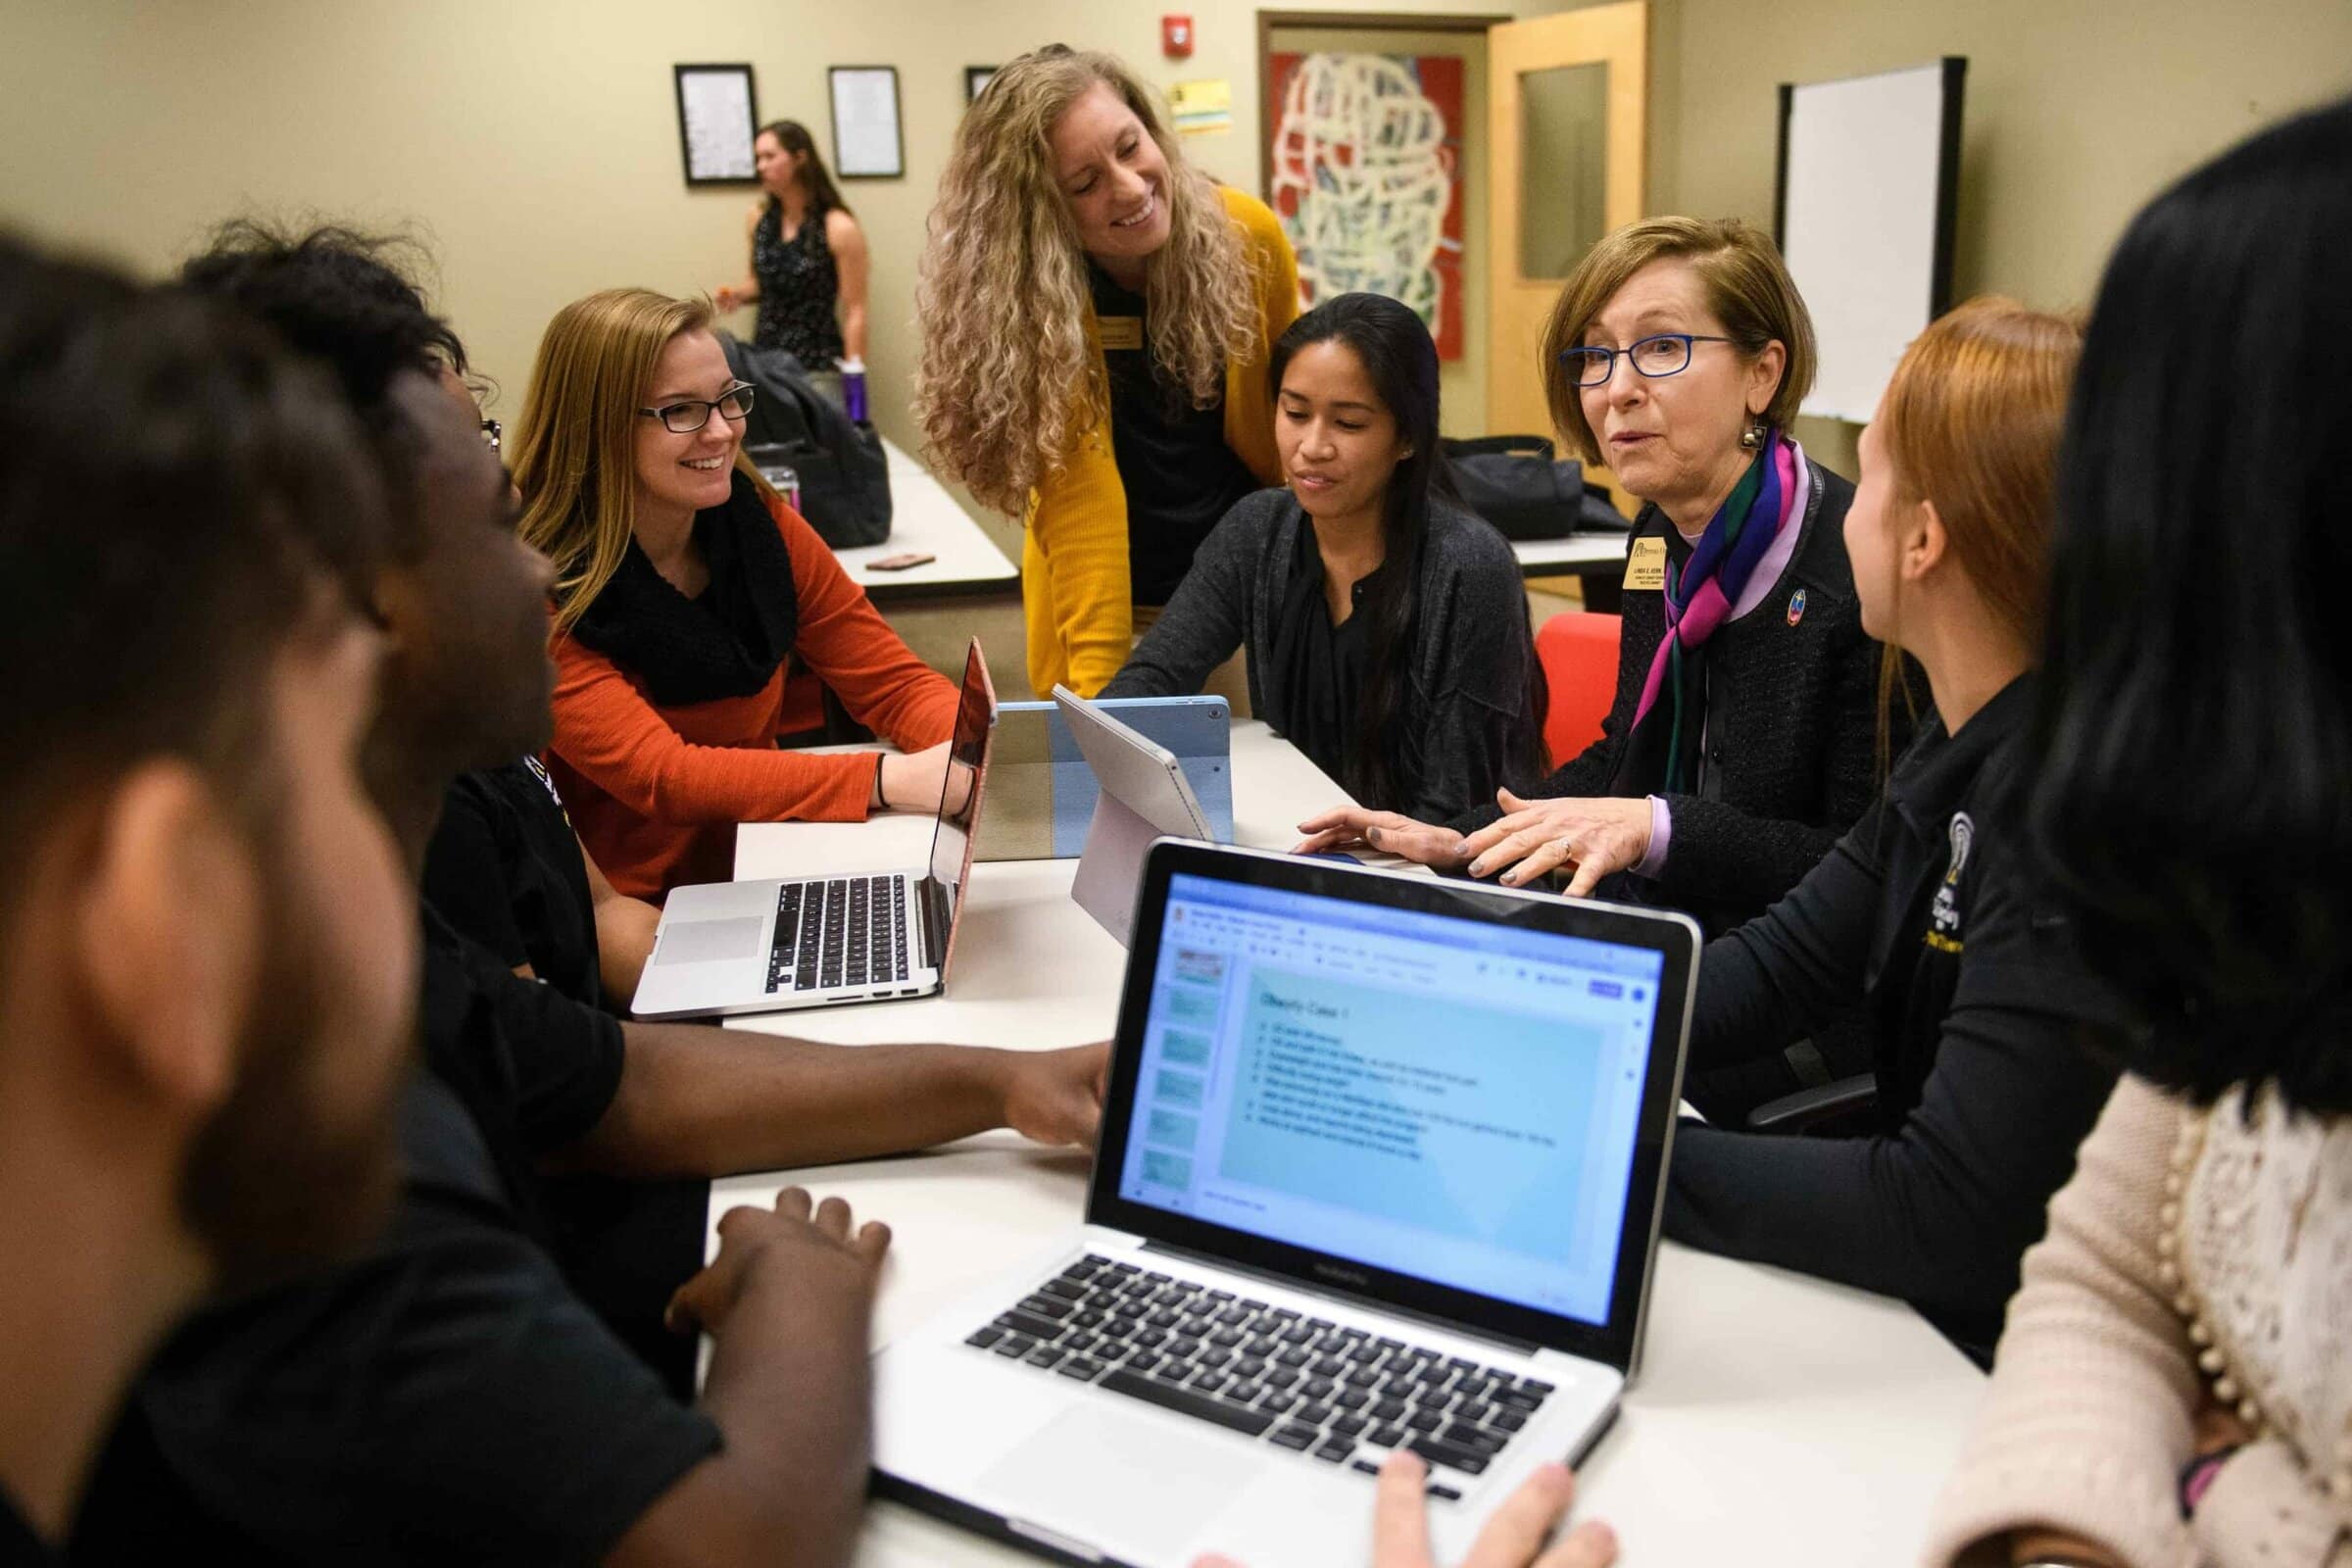 Linda Kern, dean of library sciences, talks with a group of physical therapy students about utilizing the library's resources in their research. (AJ Reynolds/Brenau University)